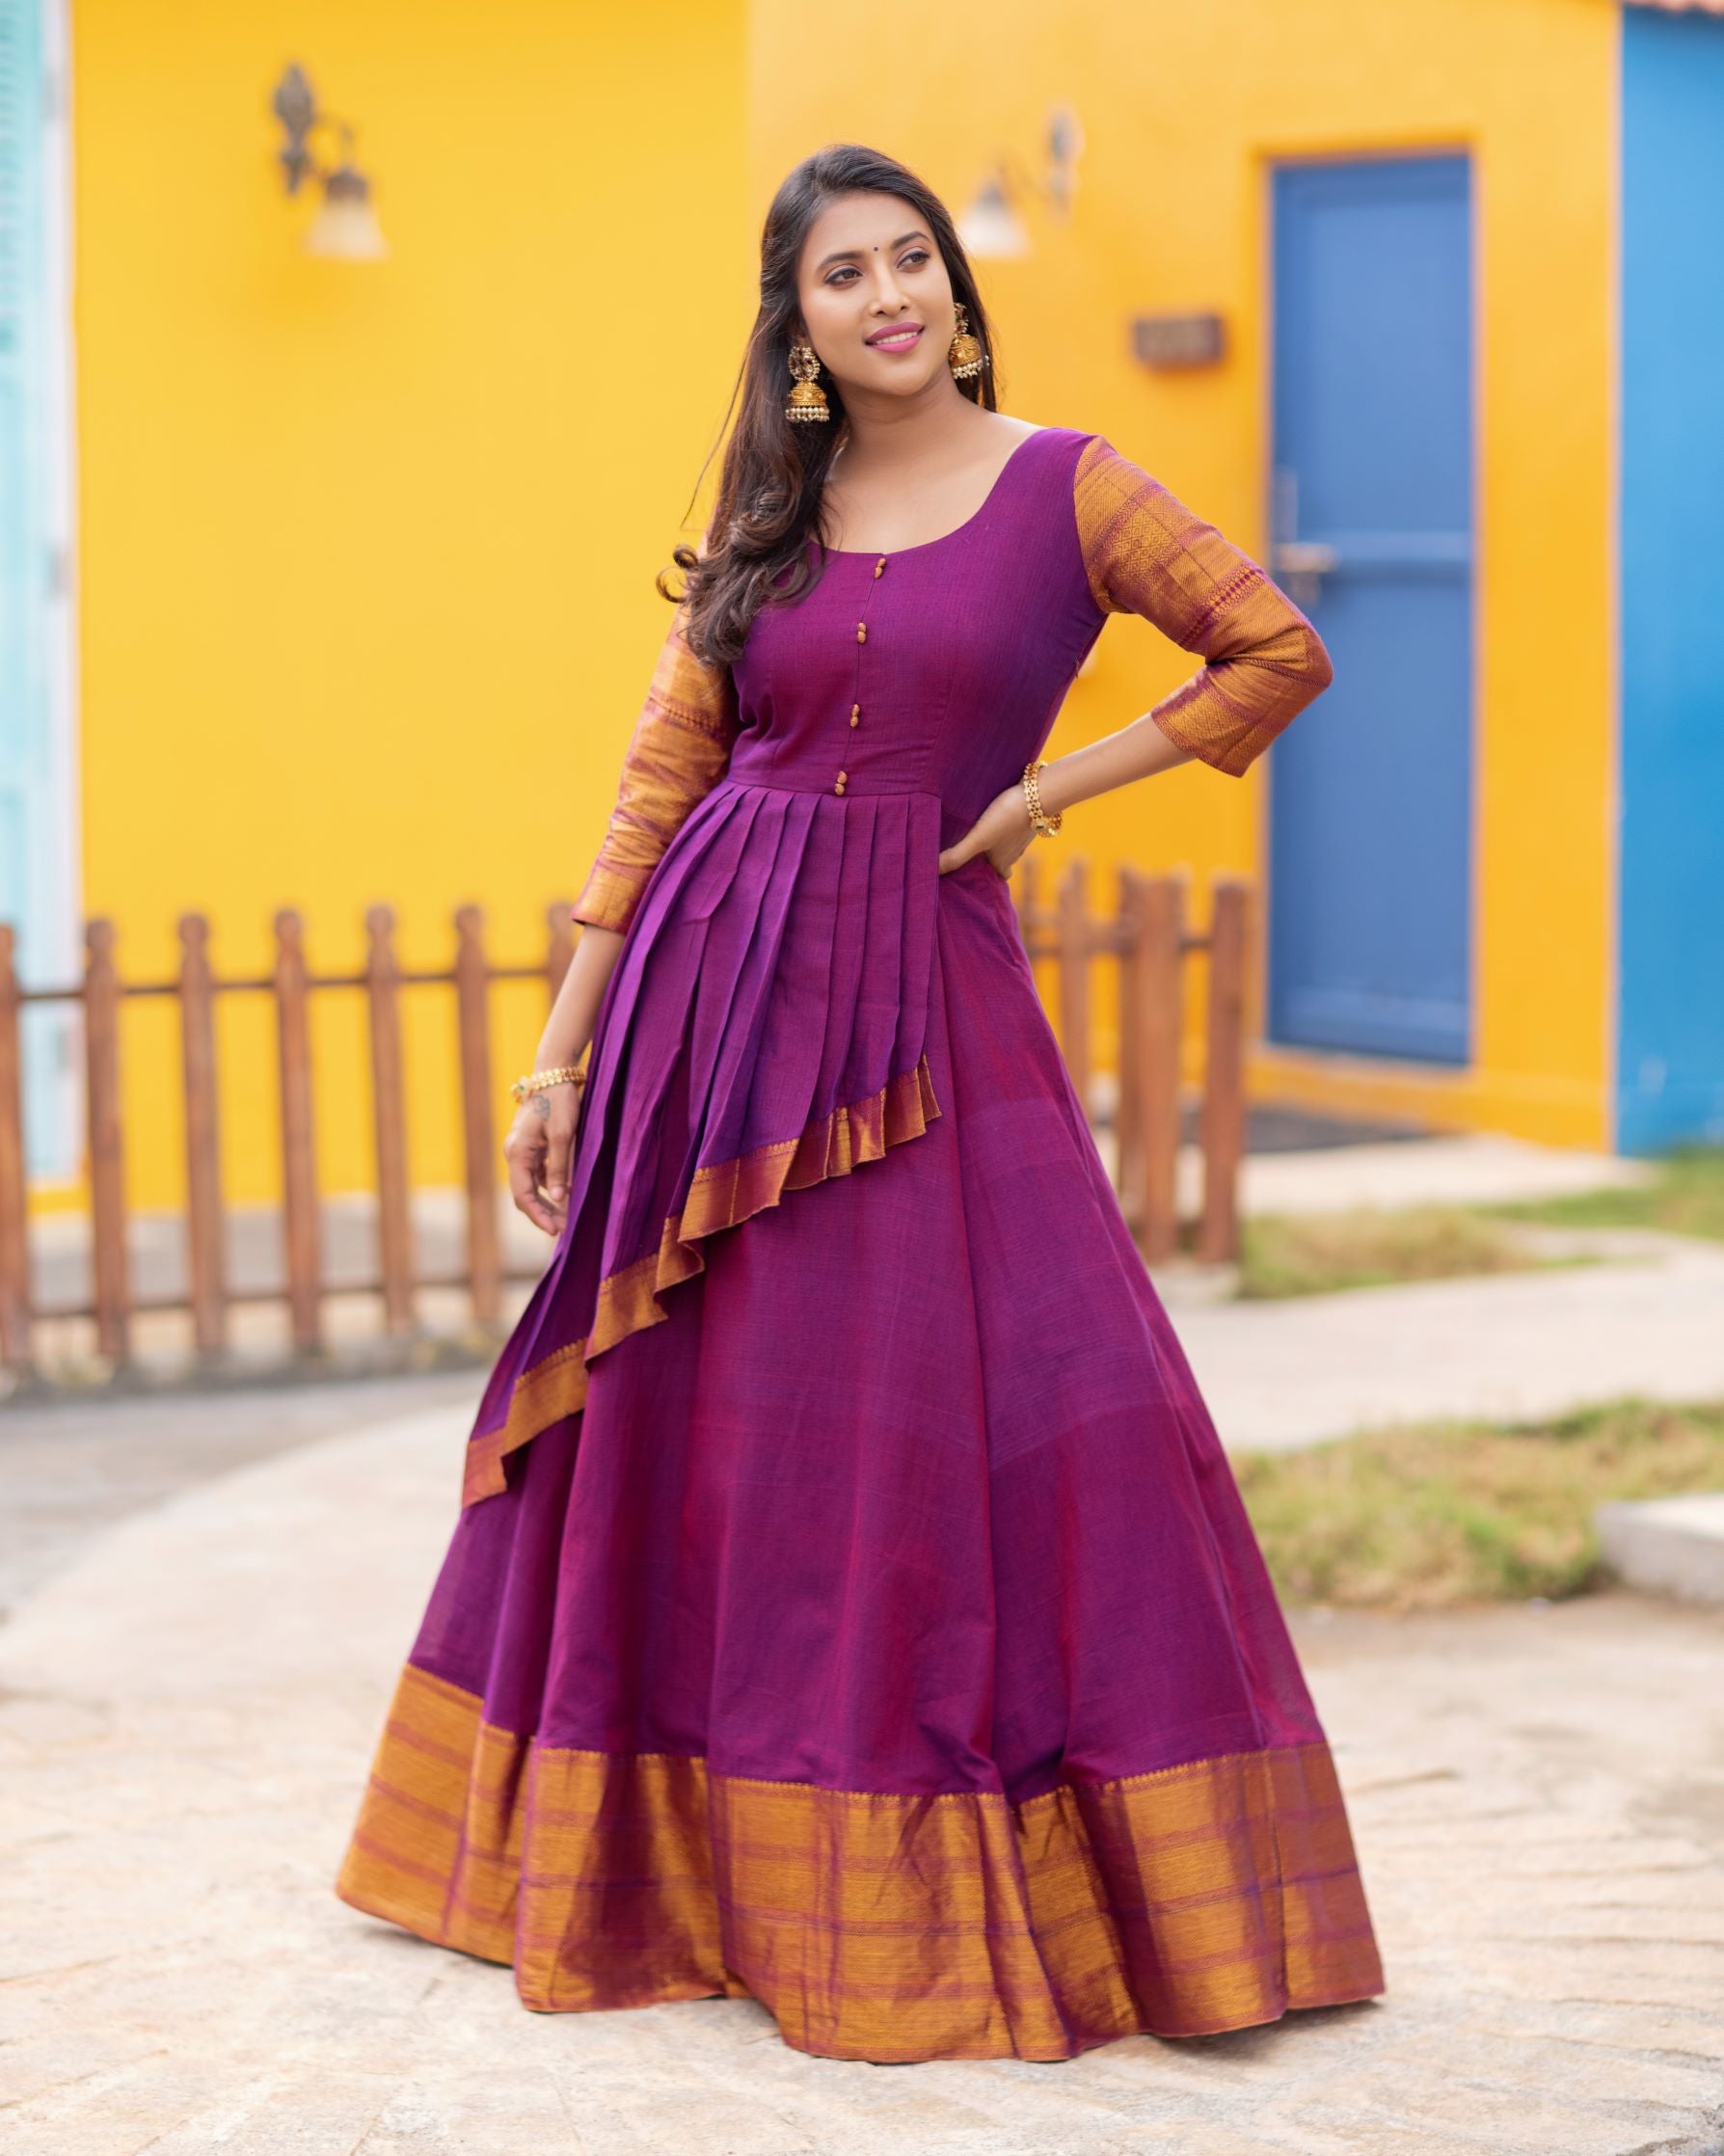 Long Dresses made out of old and Damaged Sarees LongDresses